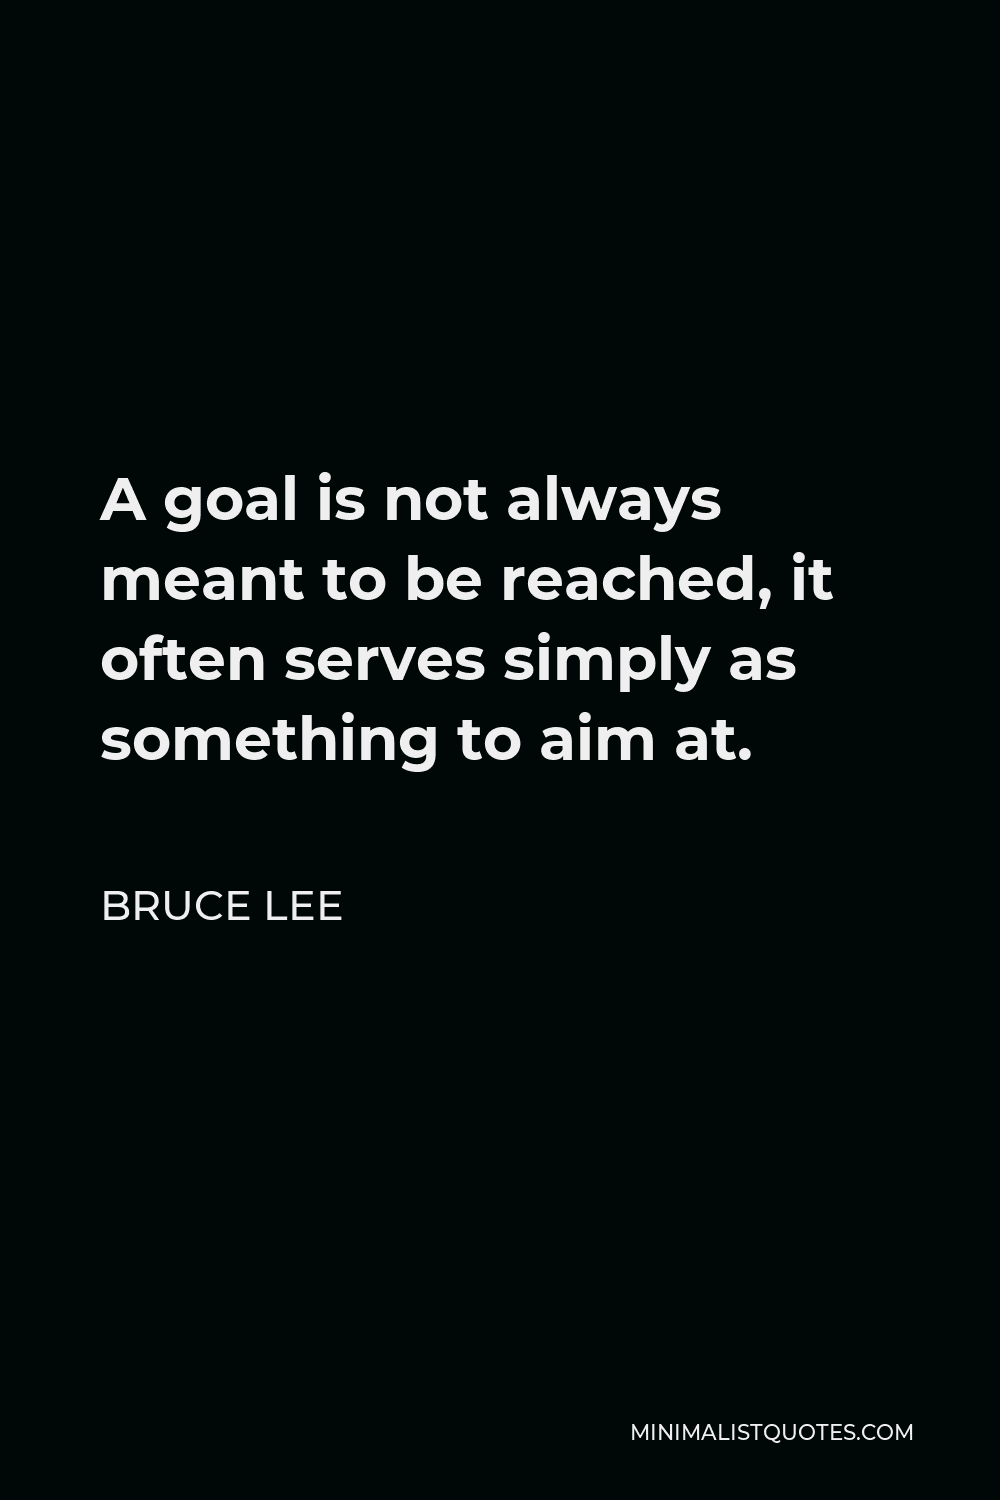 Bruce Lee Quote - A goal is not always meant to be reached, it often serves simply as something to aim at.